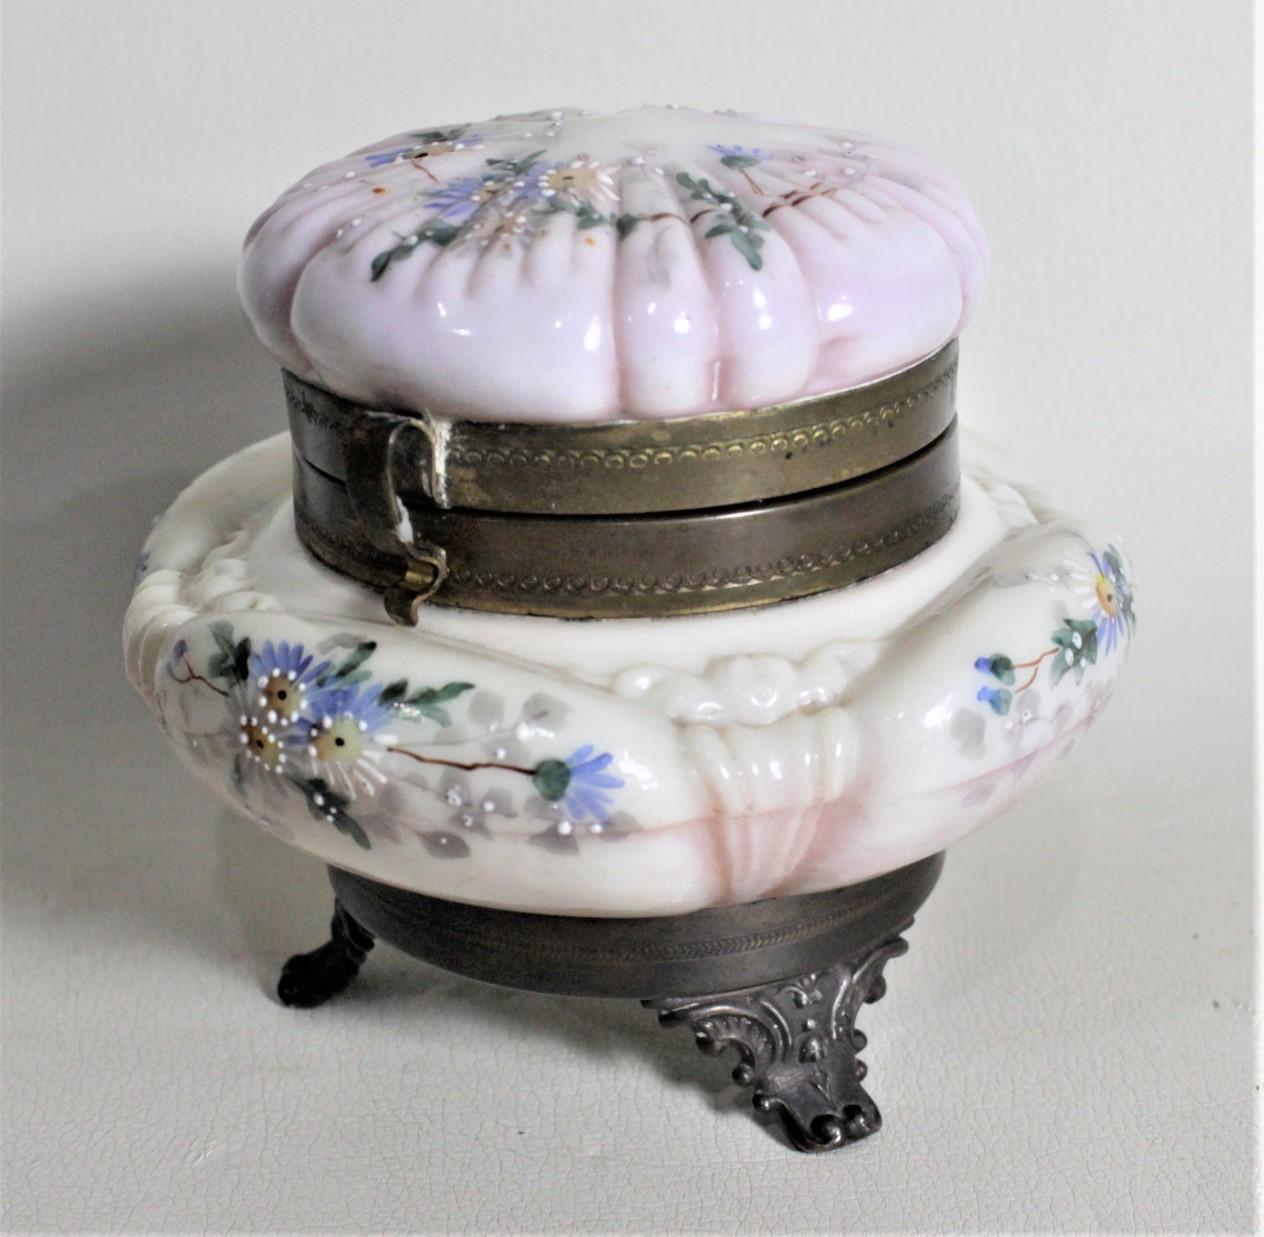 This antique pressed glass jewelry casket or jar is unsigned but presumed to have been made in the United States in circa 1880 in the period Victorian style. The jar is made of a cream base glass with a swirled rose colored glass that accents both